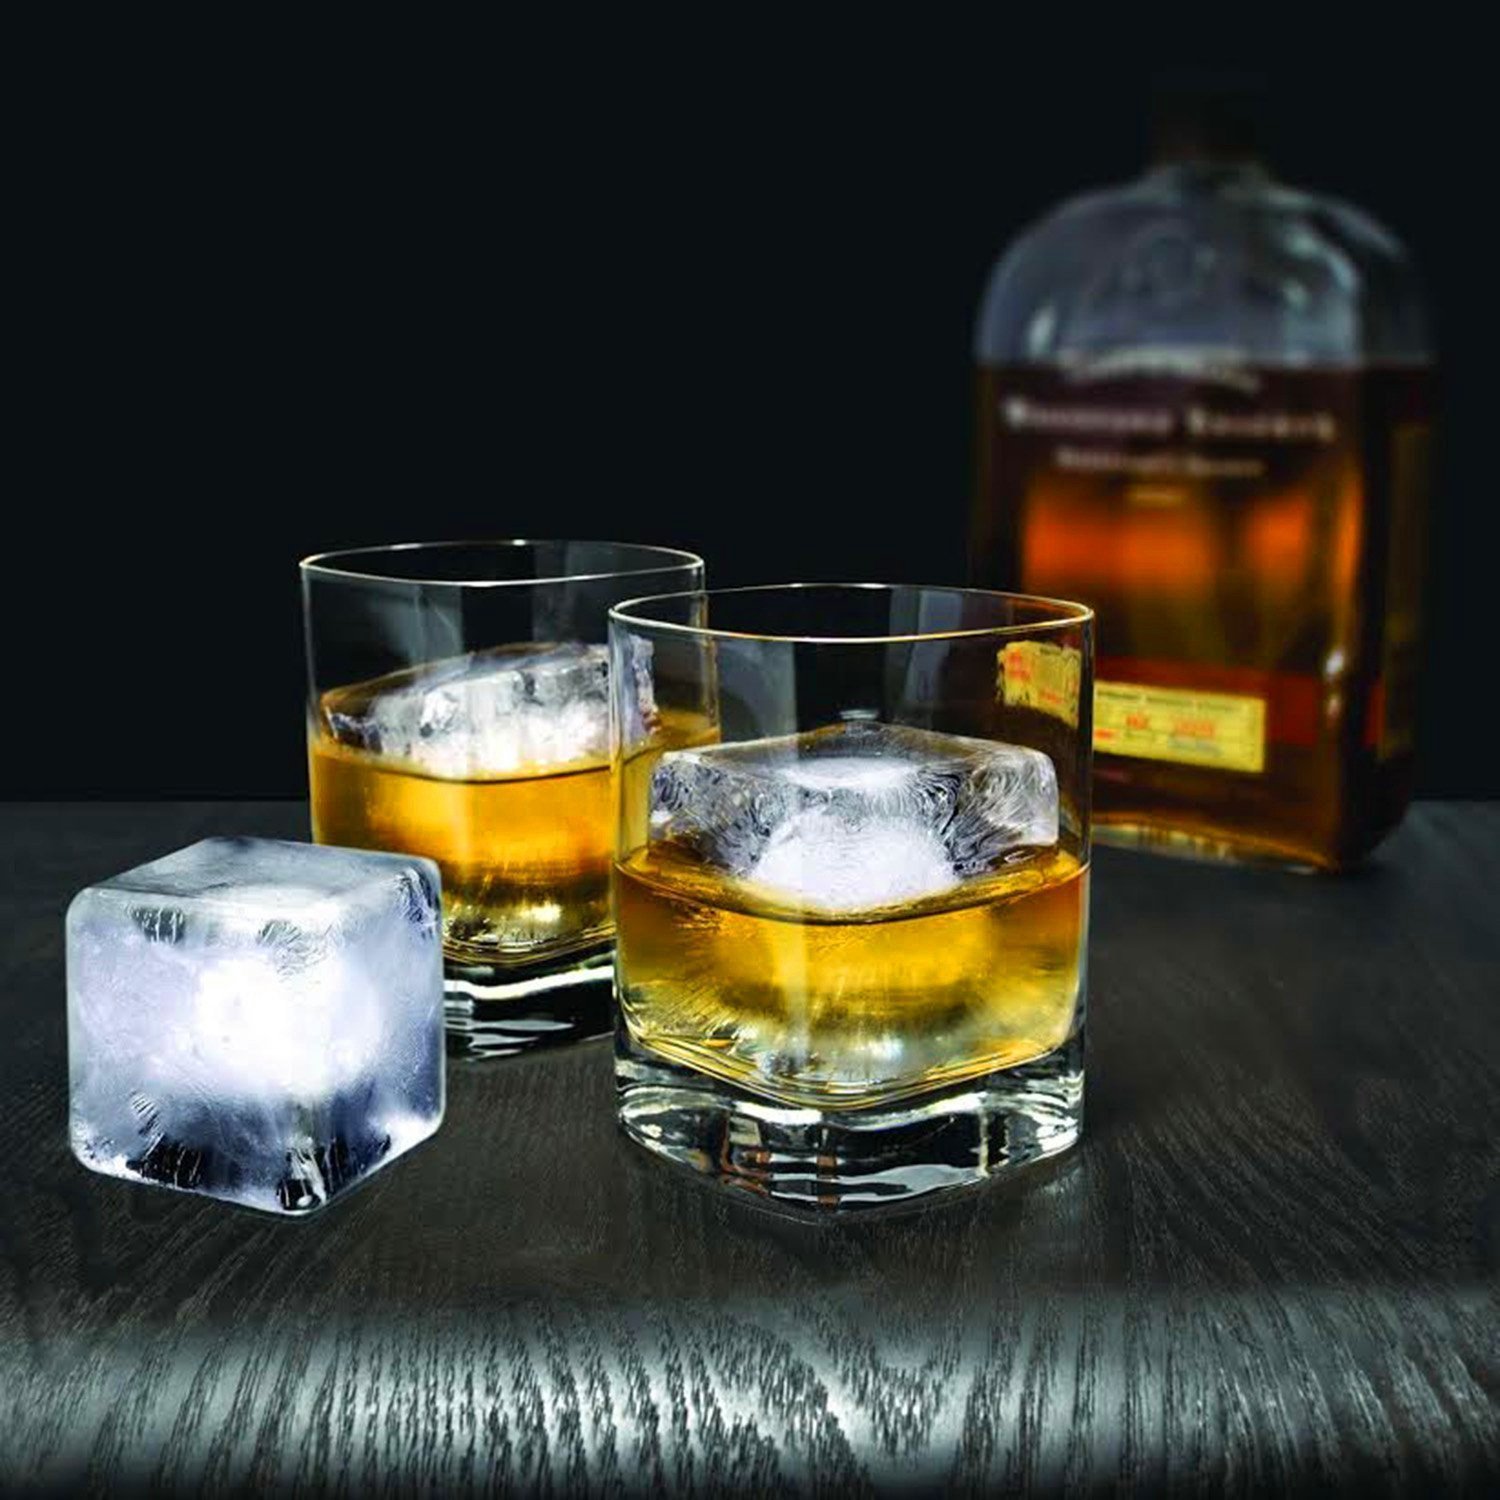 Ticent Ice Cube Trays (Set of 2) - Silicone Sphere Whiskey Ice Ball Maker with Lids & Large Square Ice Cube Molds for Cocktails & Bourbon - Reusable & BPA Free - image 4 of 7